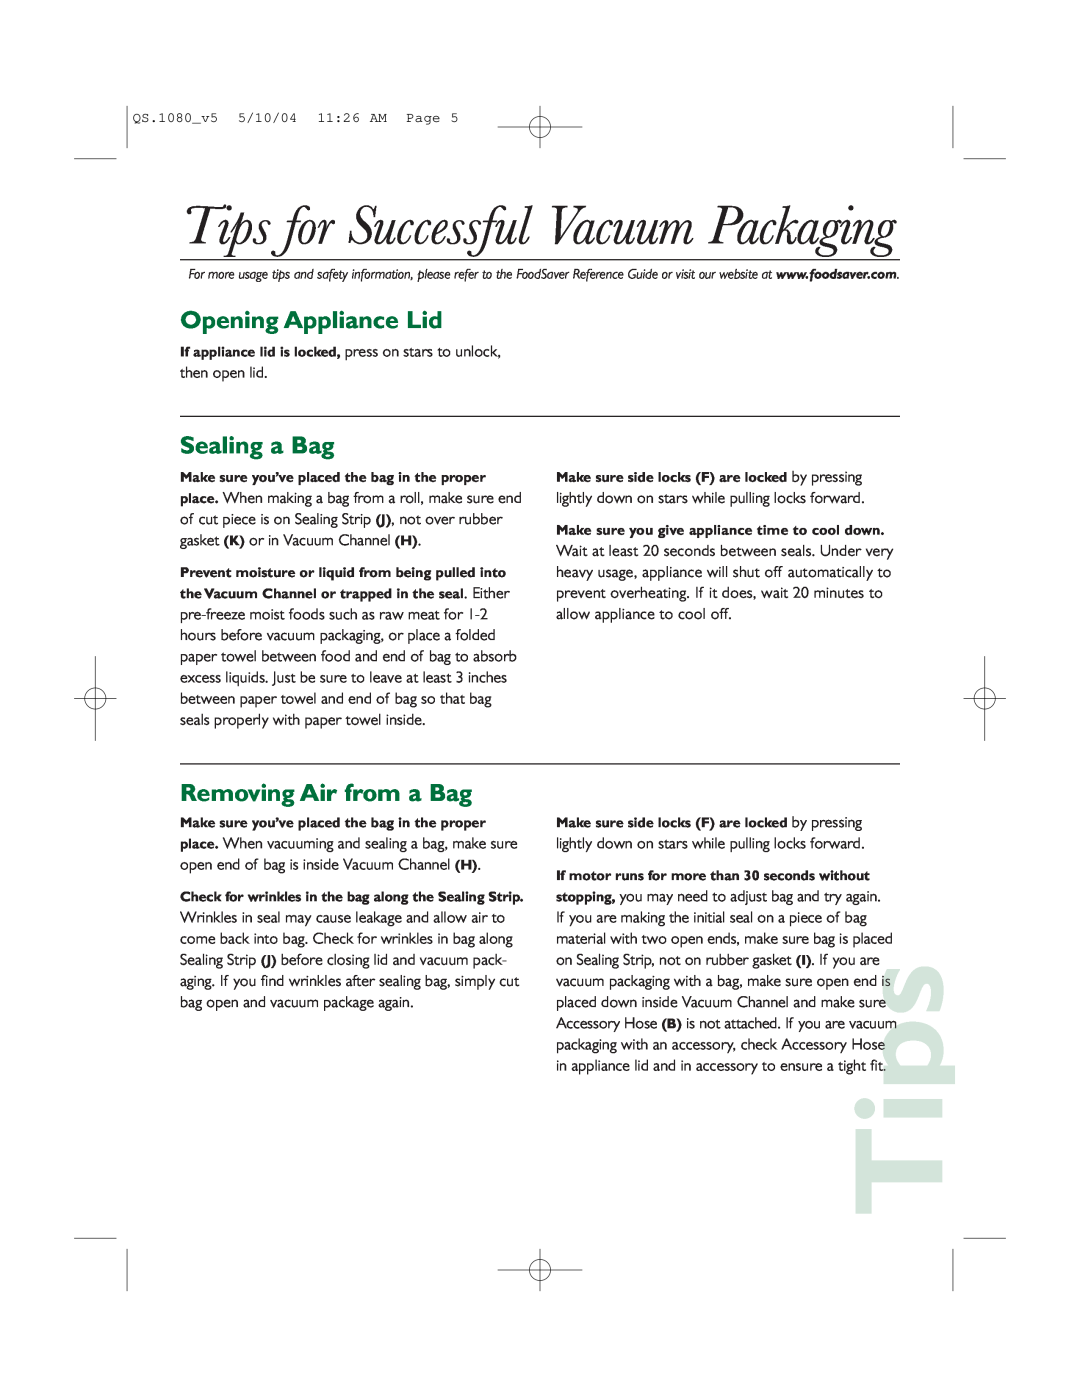 FoodSaver V1080 Tips for Successful Vacuum Packaging, Opening Appliance Lid, Sealing a Bag, Removing Air from a Bag 